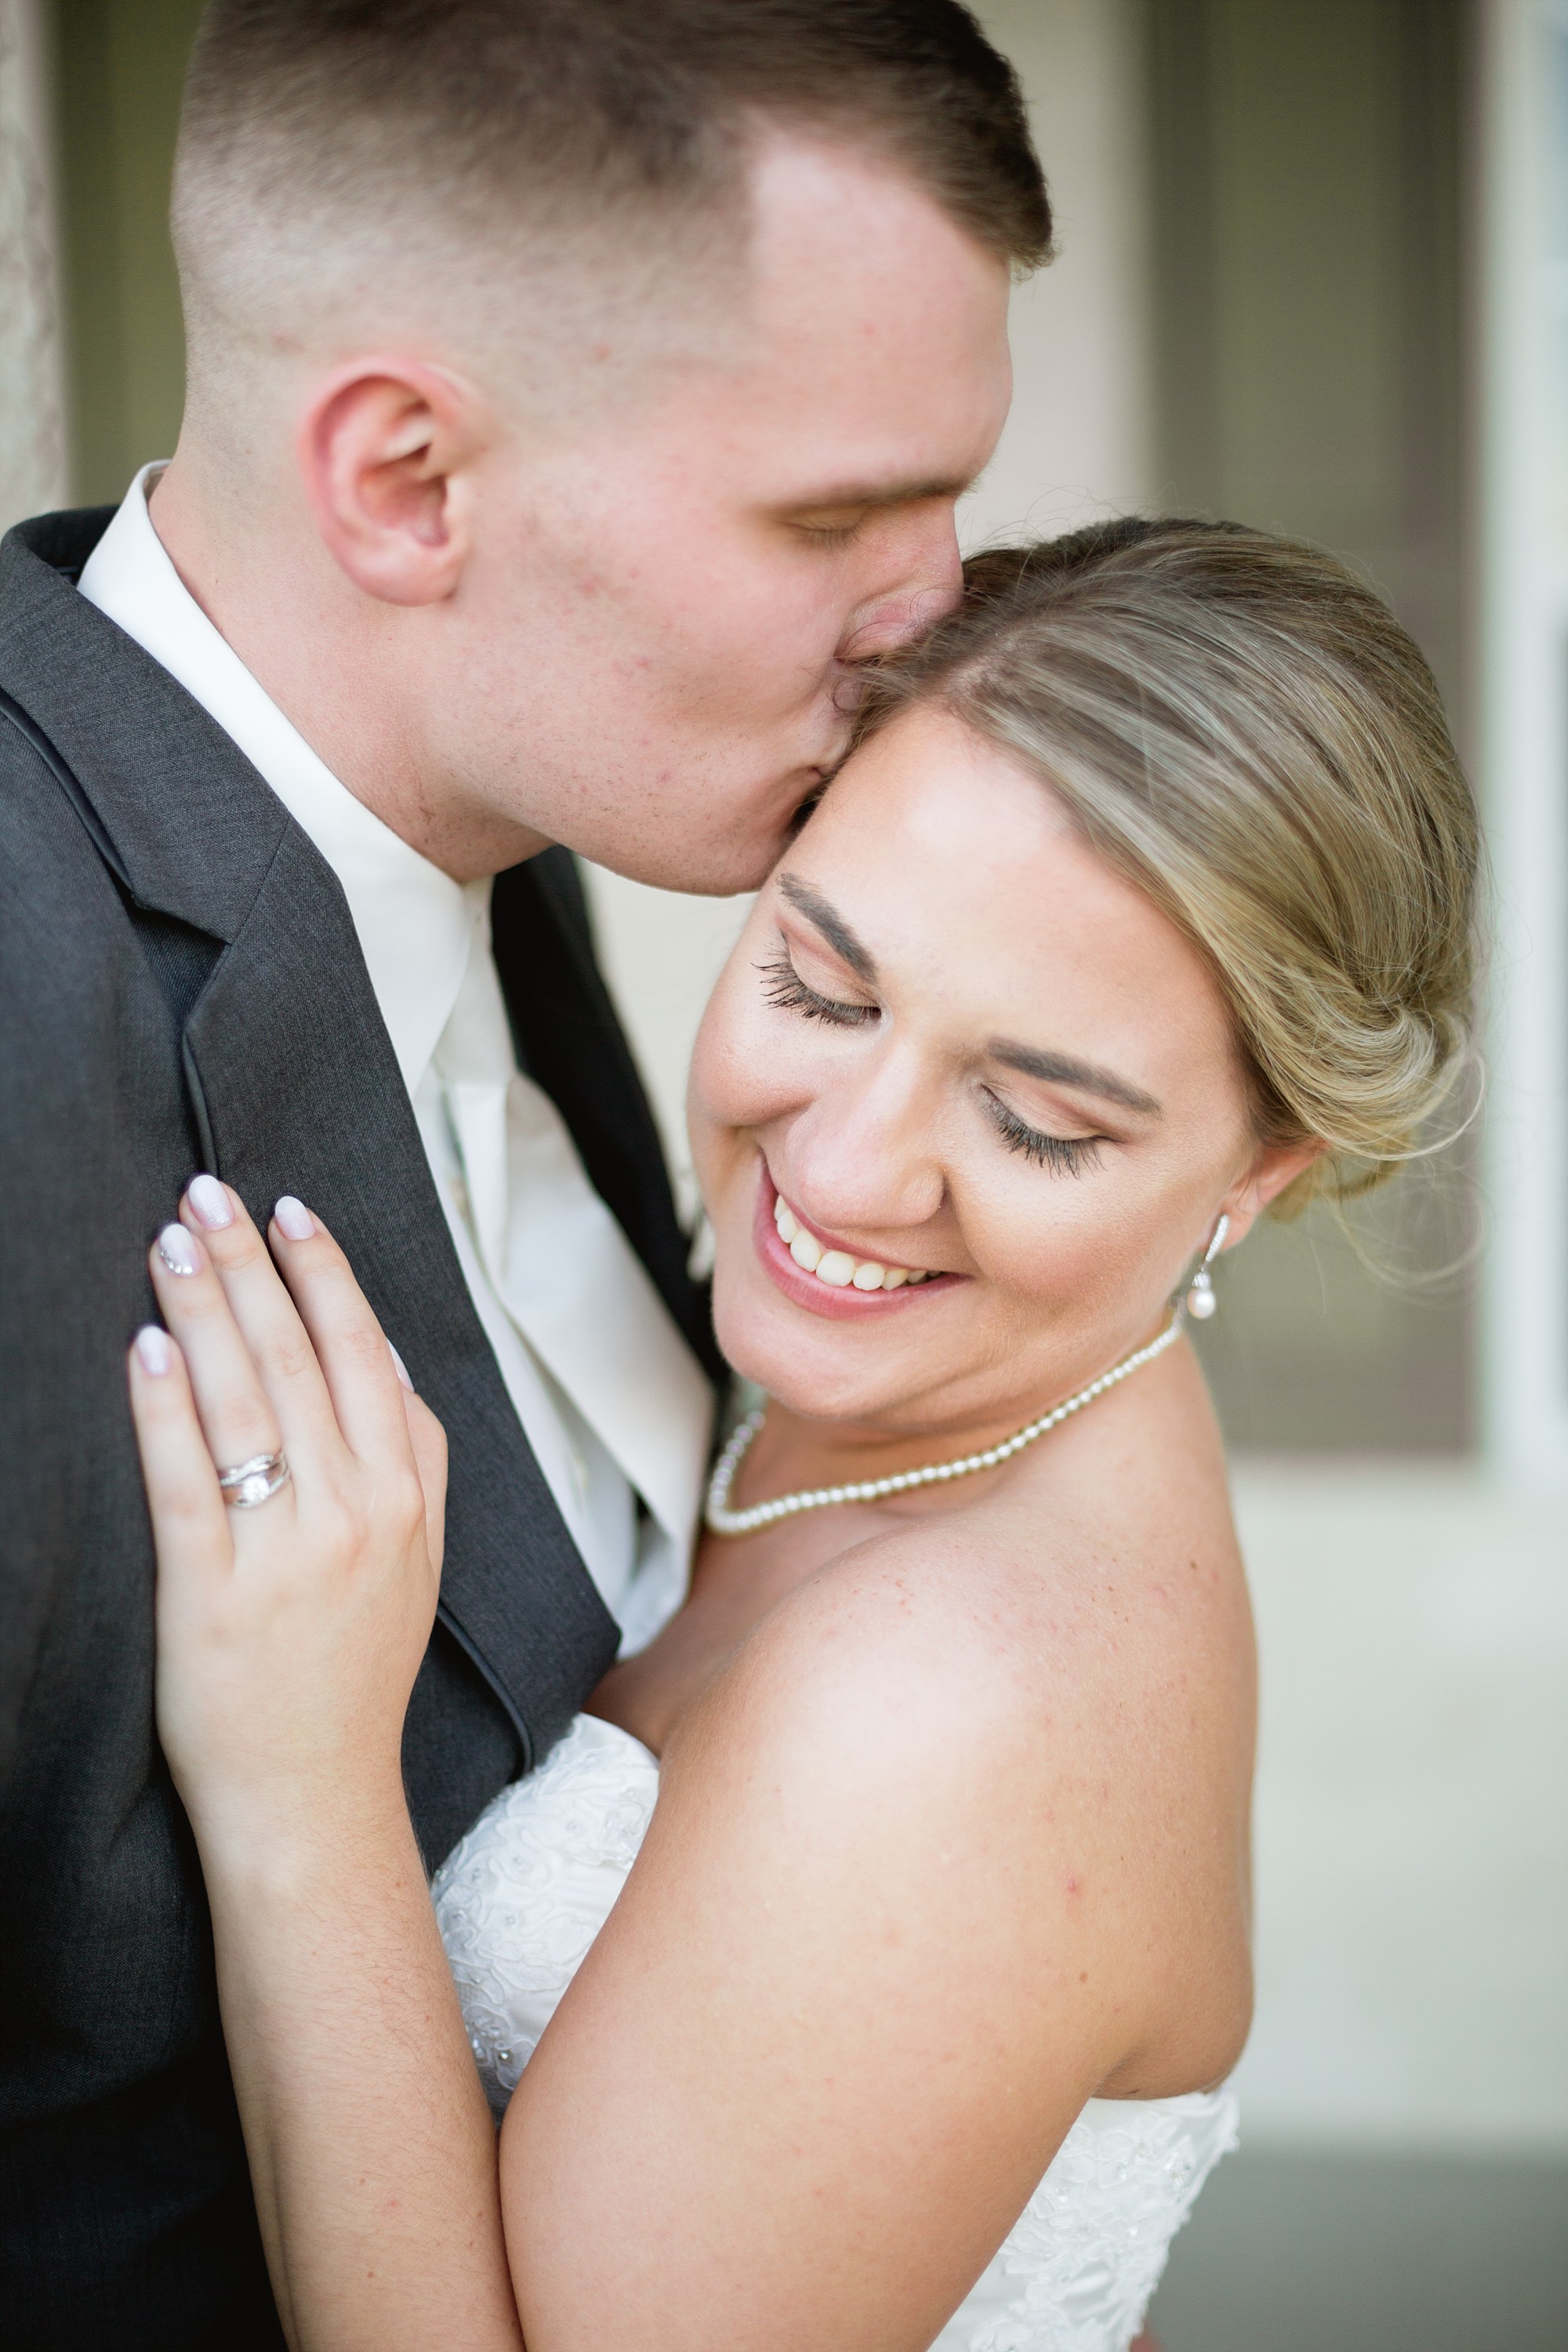 A classic springtime blush wedding at Michigan State University in East Lansing, Michigan by Breanne Rochelle Photography.